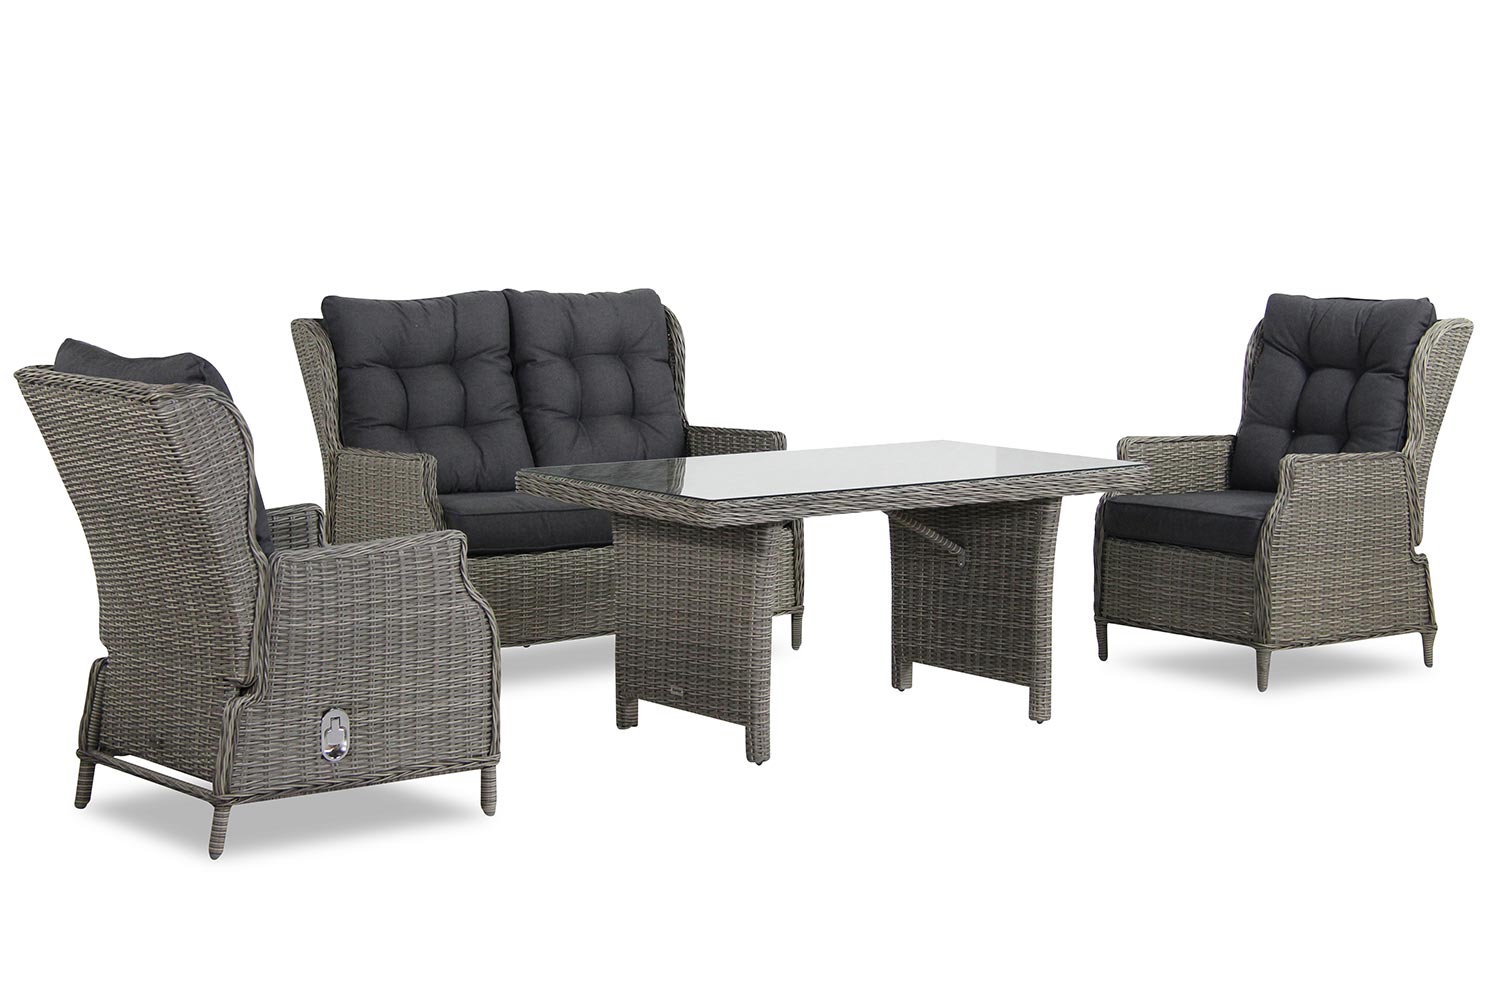 Garden Collections New Castle stoel bank loungeset 4 delig